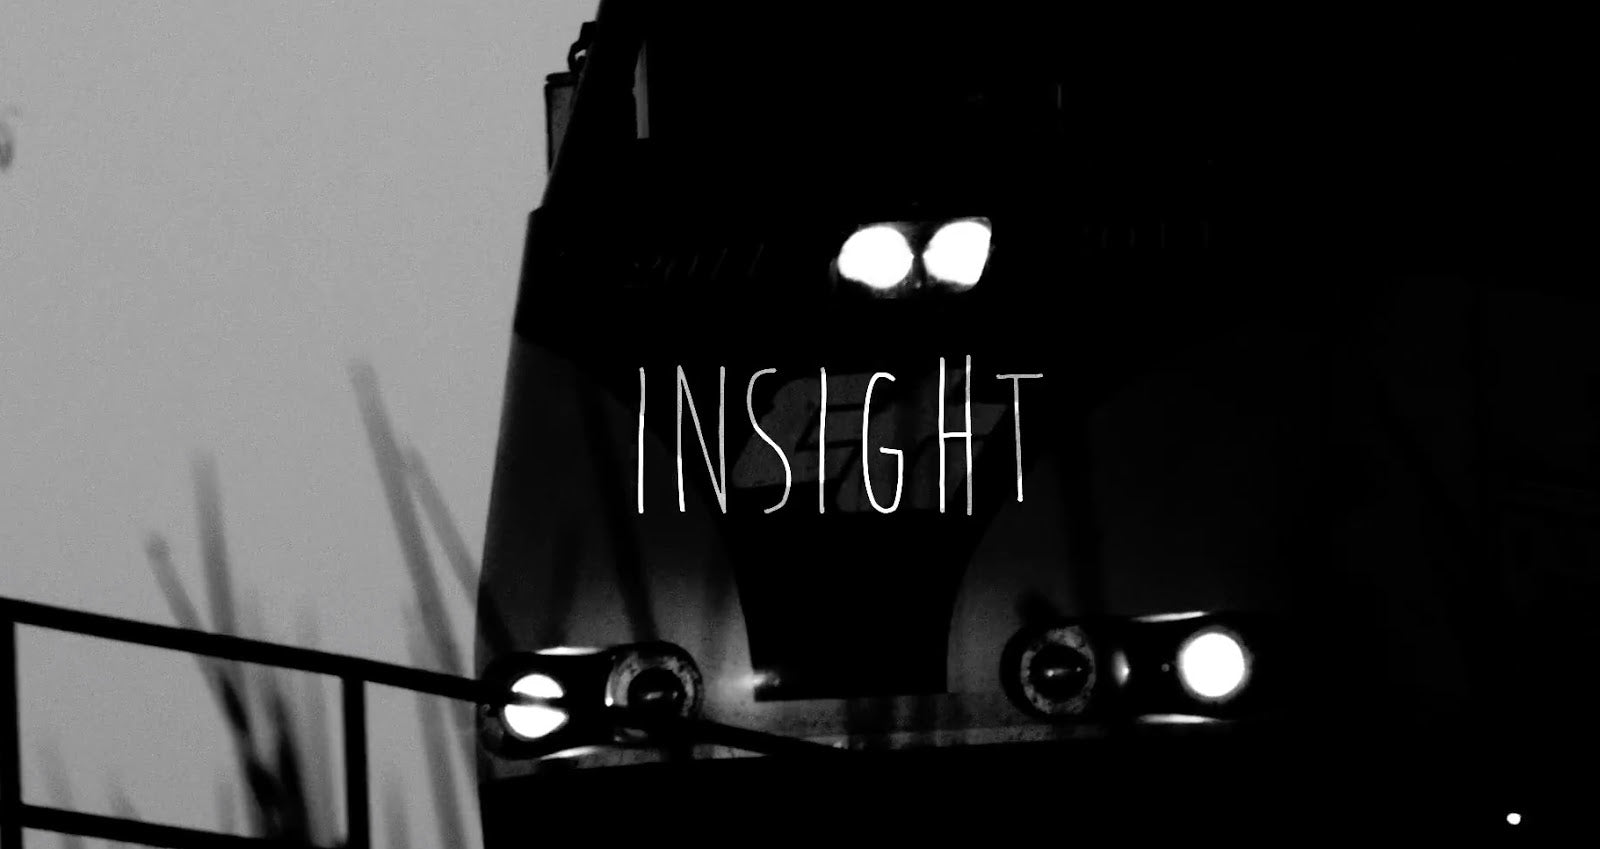 THE SECTION | Trever Maur's final installment of the 'Insight' series